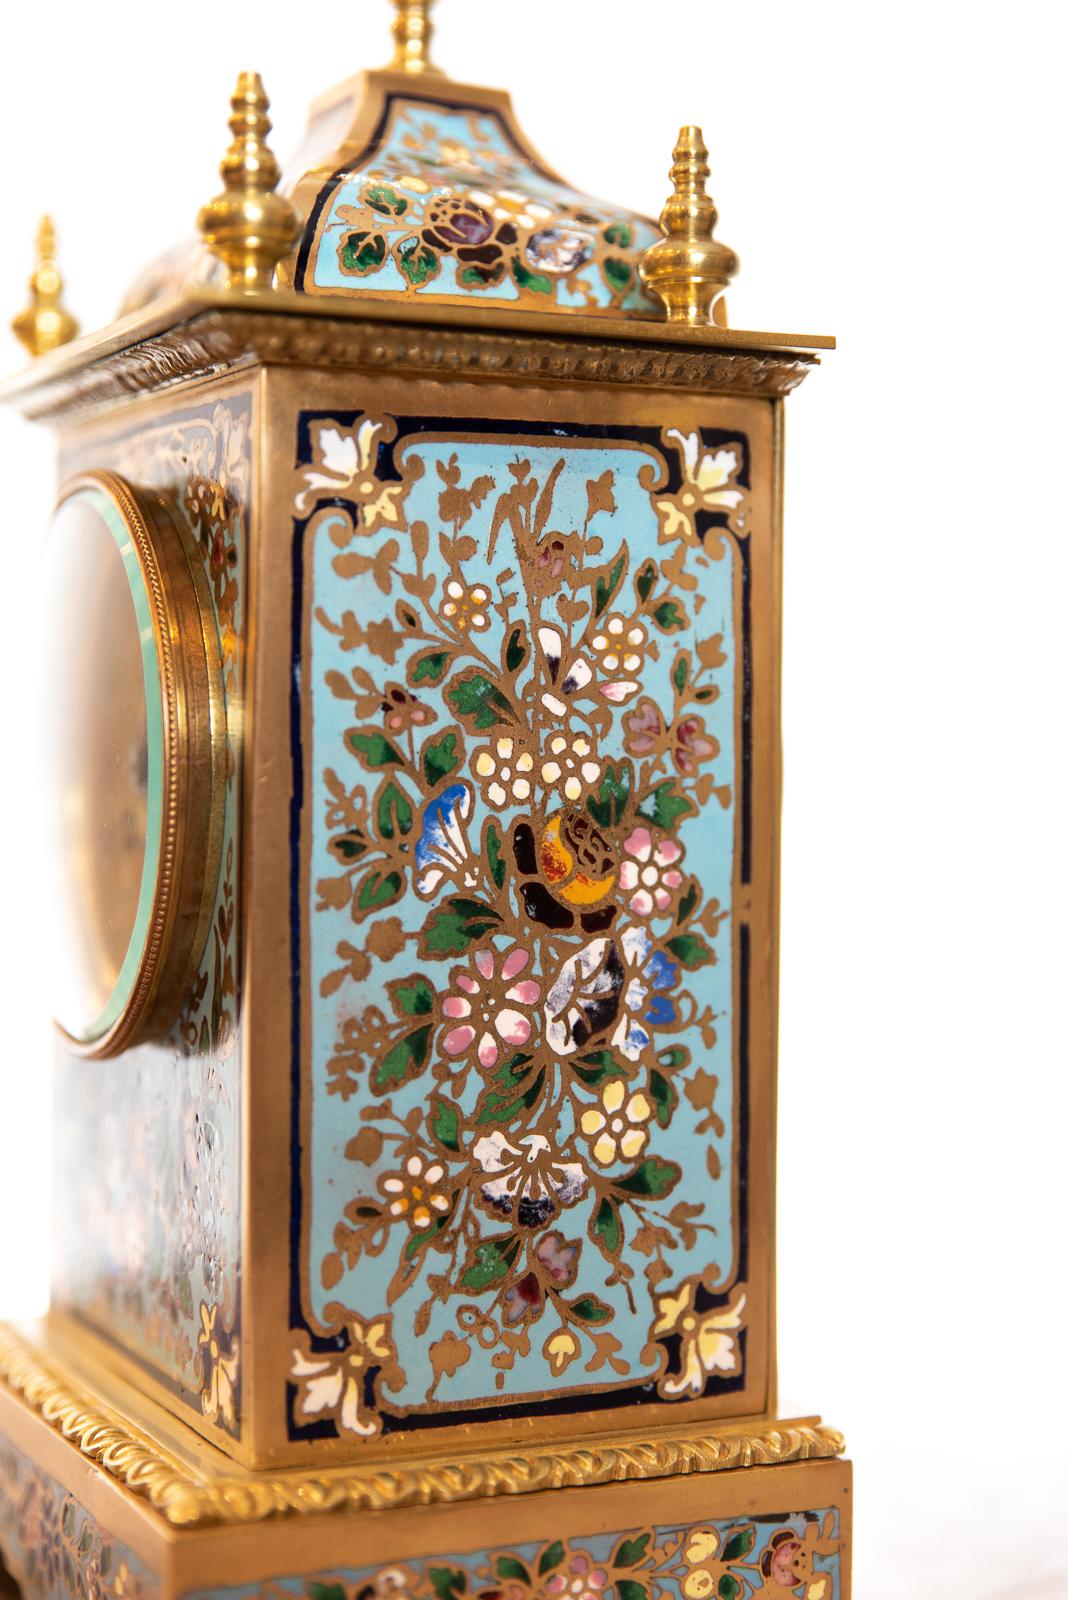 Champlevé Enamel Mantle Clock Made in Paris, France, circa 1875 In Good Condition For Sale In Cheltenham, GB